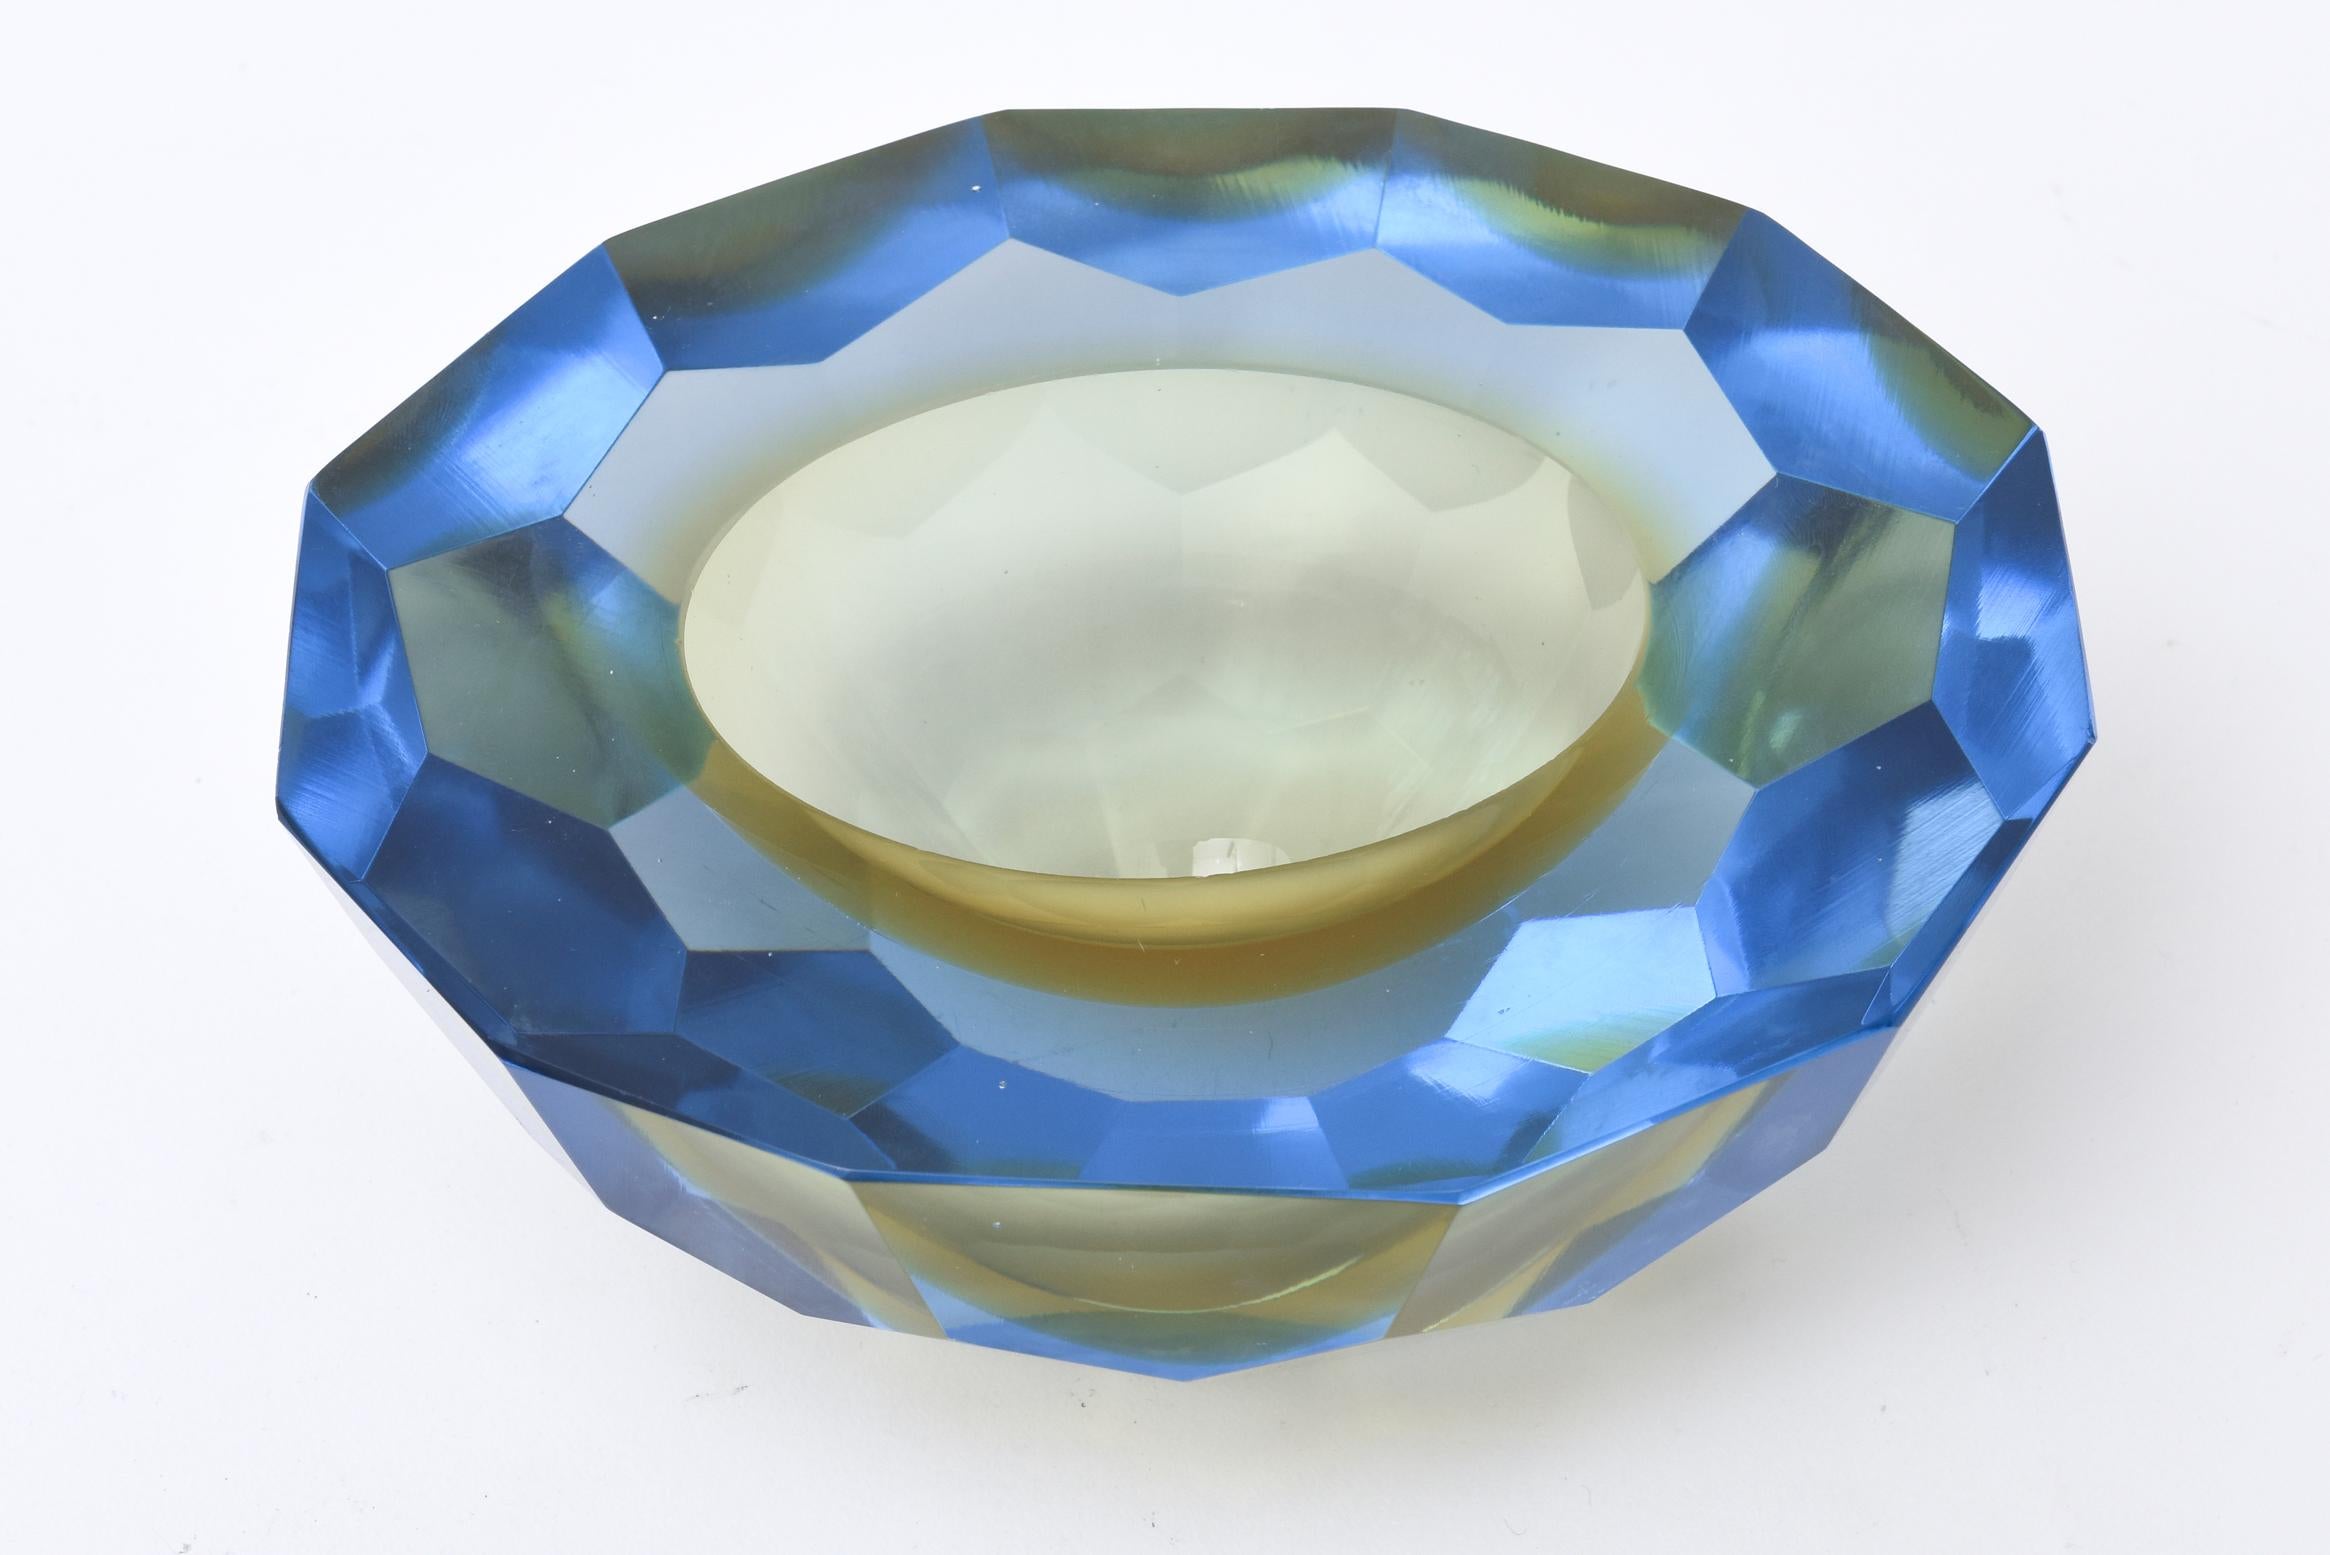 This gorgeous gem of an Italian hand blown Murano bowl by Alessandro Mandruzzato is diamond faceted surround in Sommerso colors in geode form. The flat top os polished and the shape is oval. These are sometimes called caviar bowls for serving the